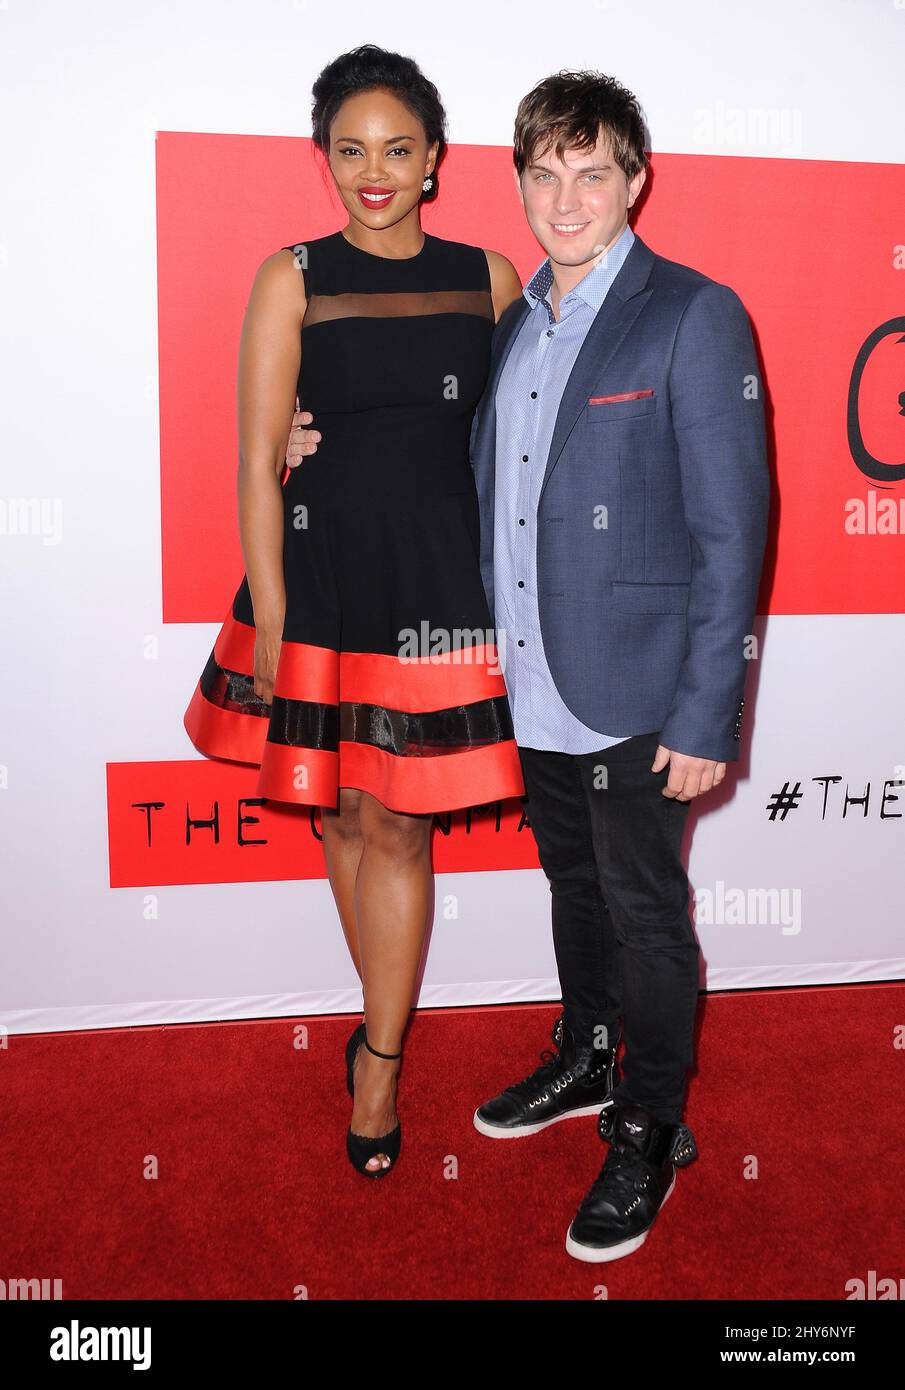 Sharon Leal attending 'The Gunman' Los Angeles Premiere held at Regal Cinemas L.A. Live Stock Photo